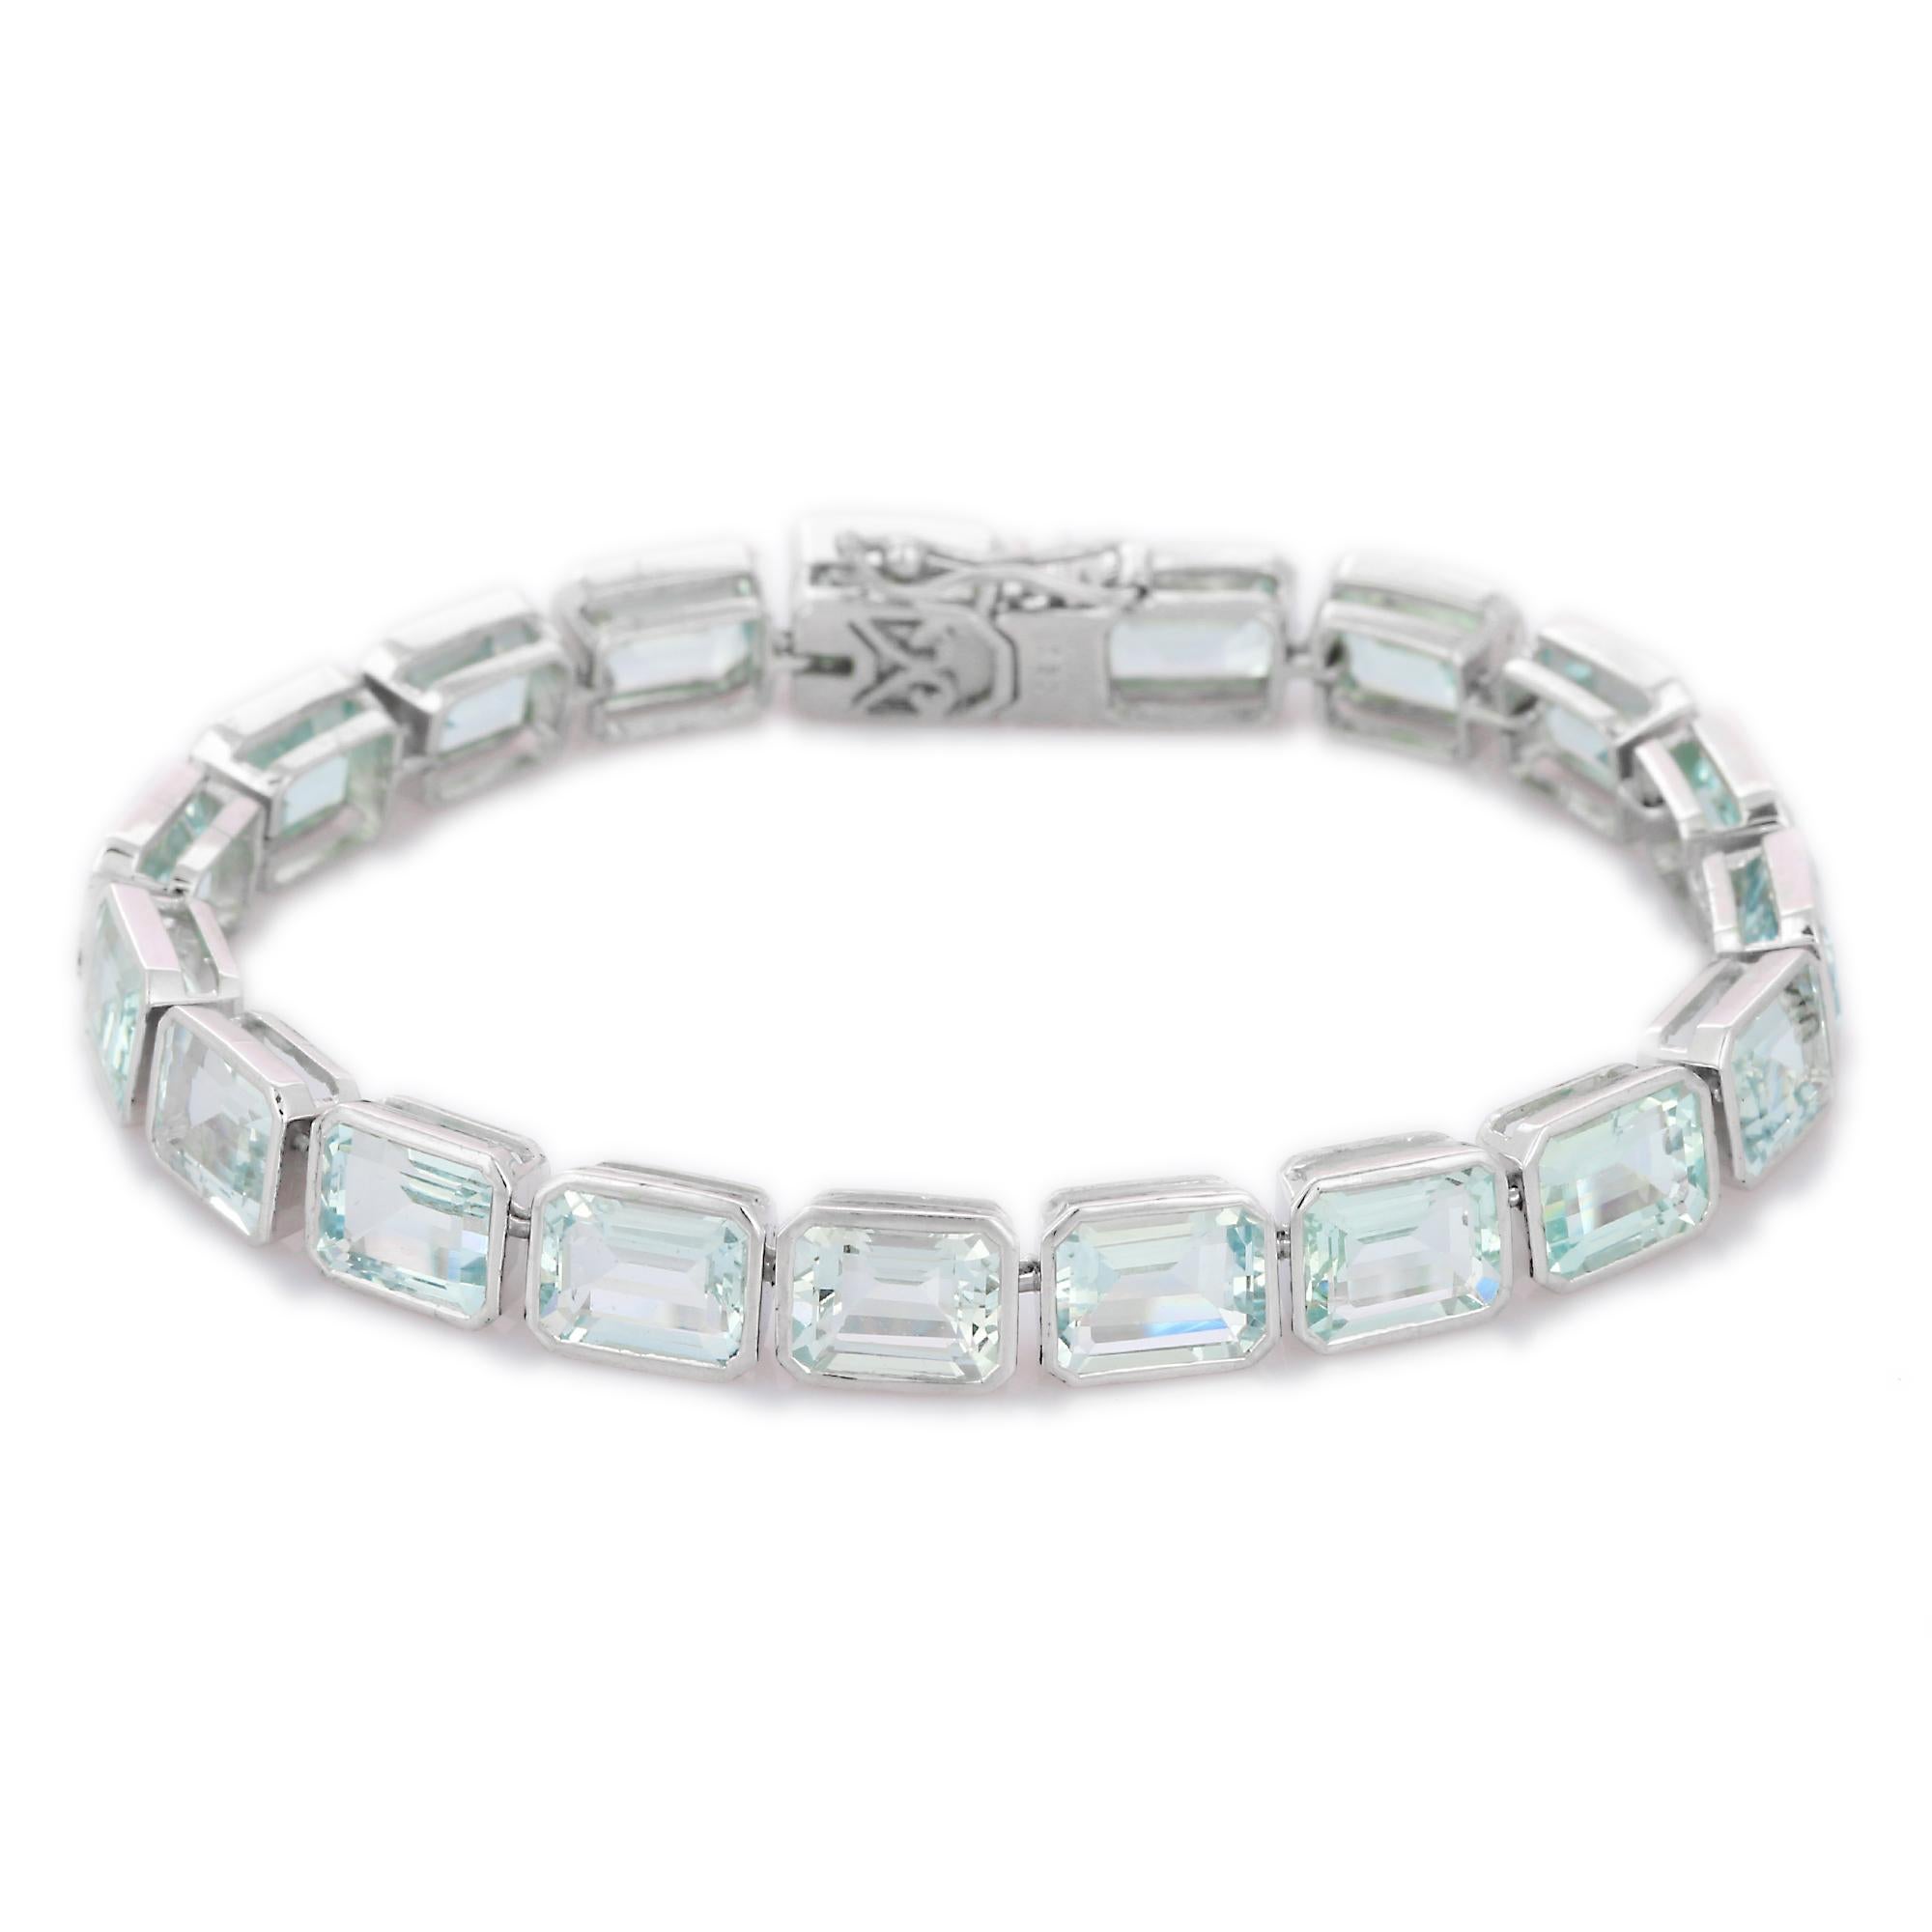 Aquamarine bracelet in 18K Gold. It has a perfect octagon cut gemstone to make you stand out on any occasion or an event. 
A tennis bracelet is an essential piece of jewelry when it comes to your wedding day. The sleek and elegant style complements